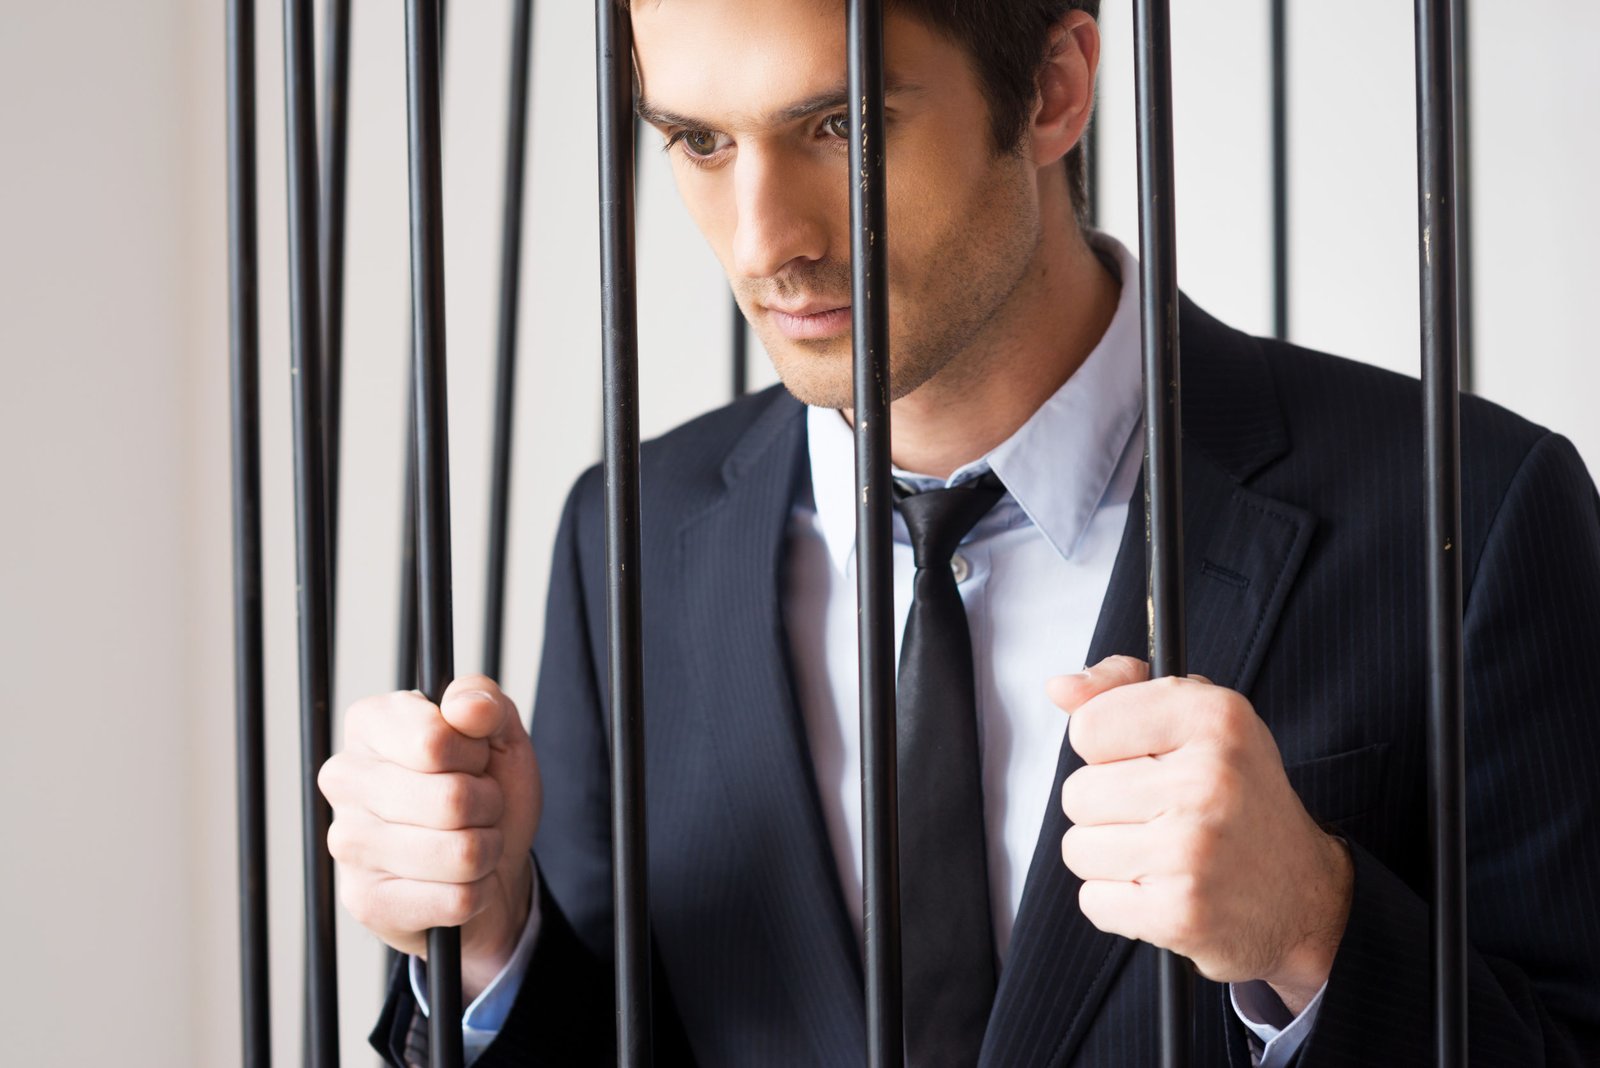 A person waiting for appearance bond behind the jail bars